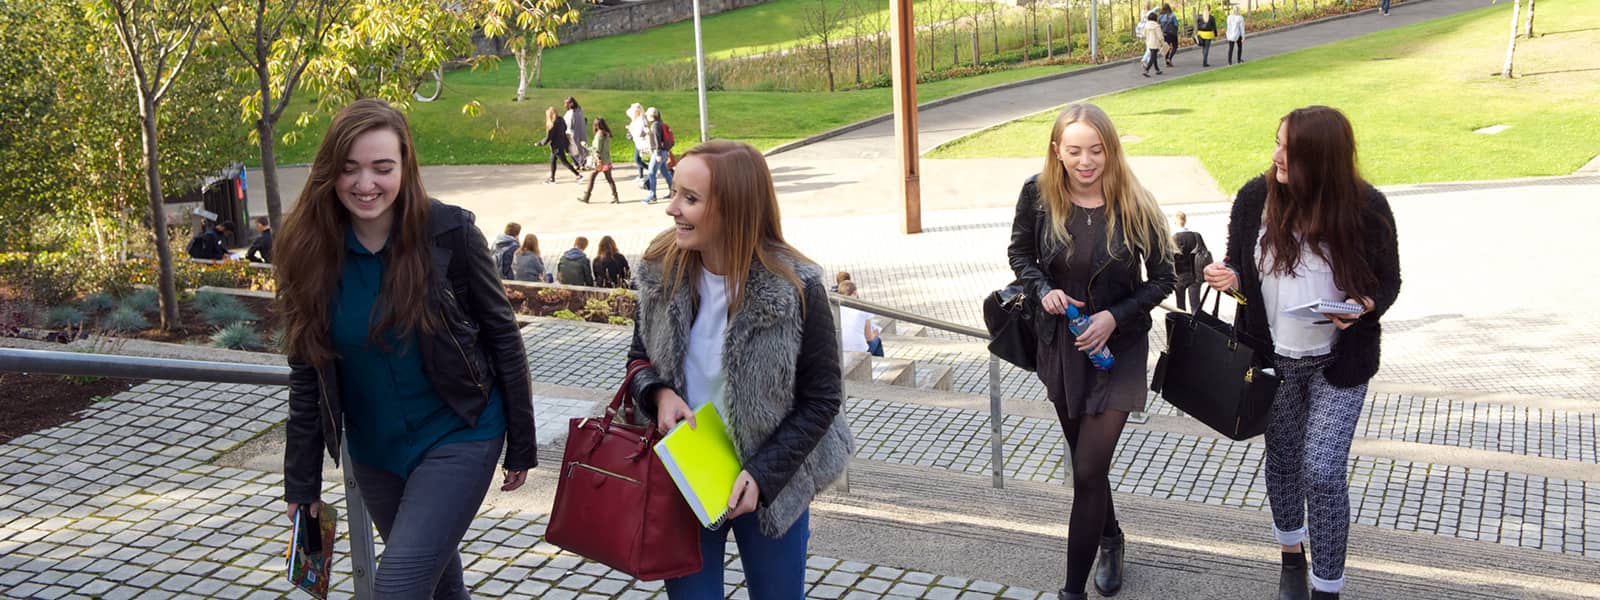 Students in Rottenrow Gardens